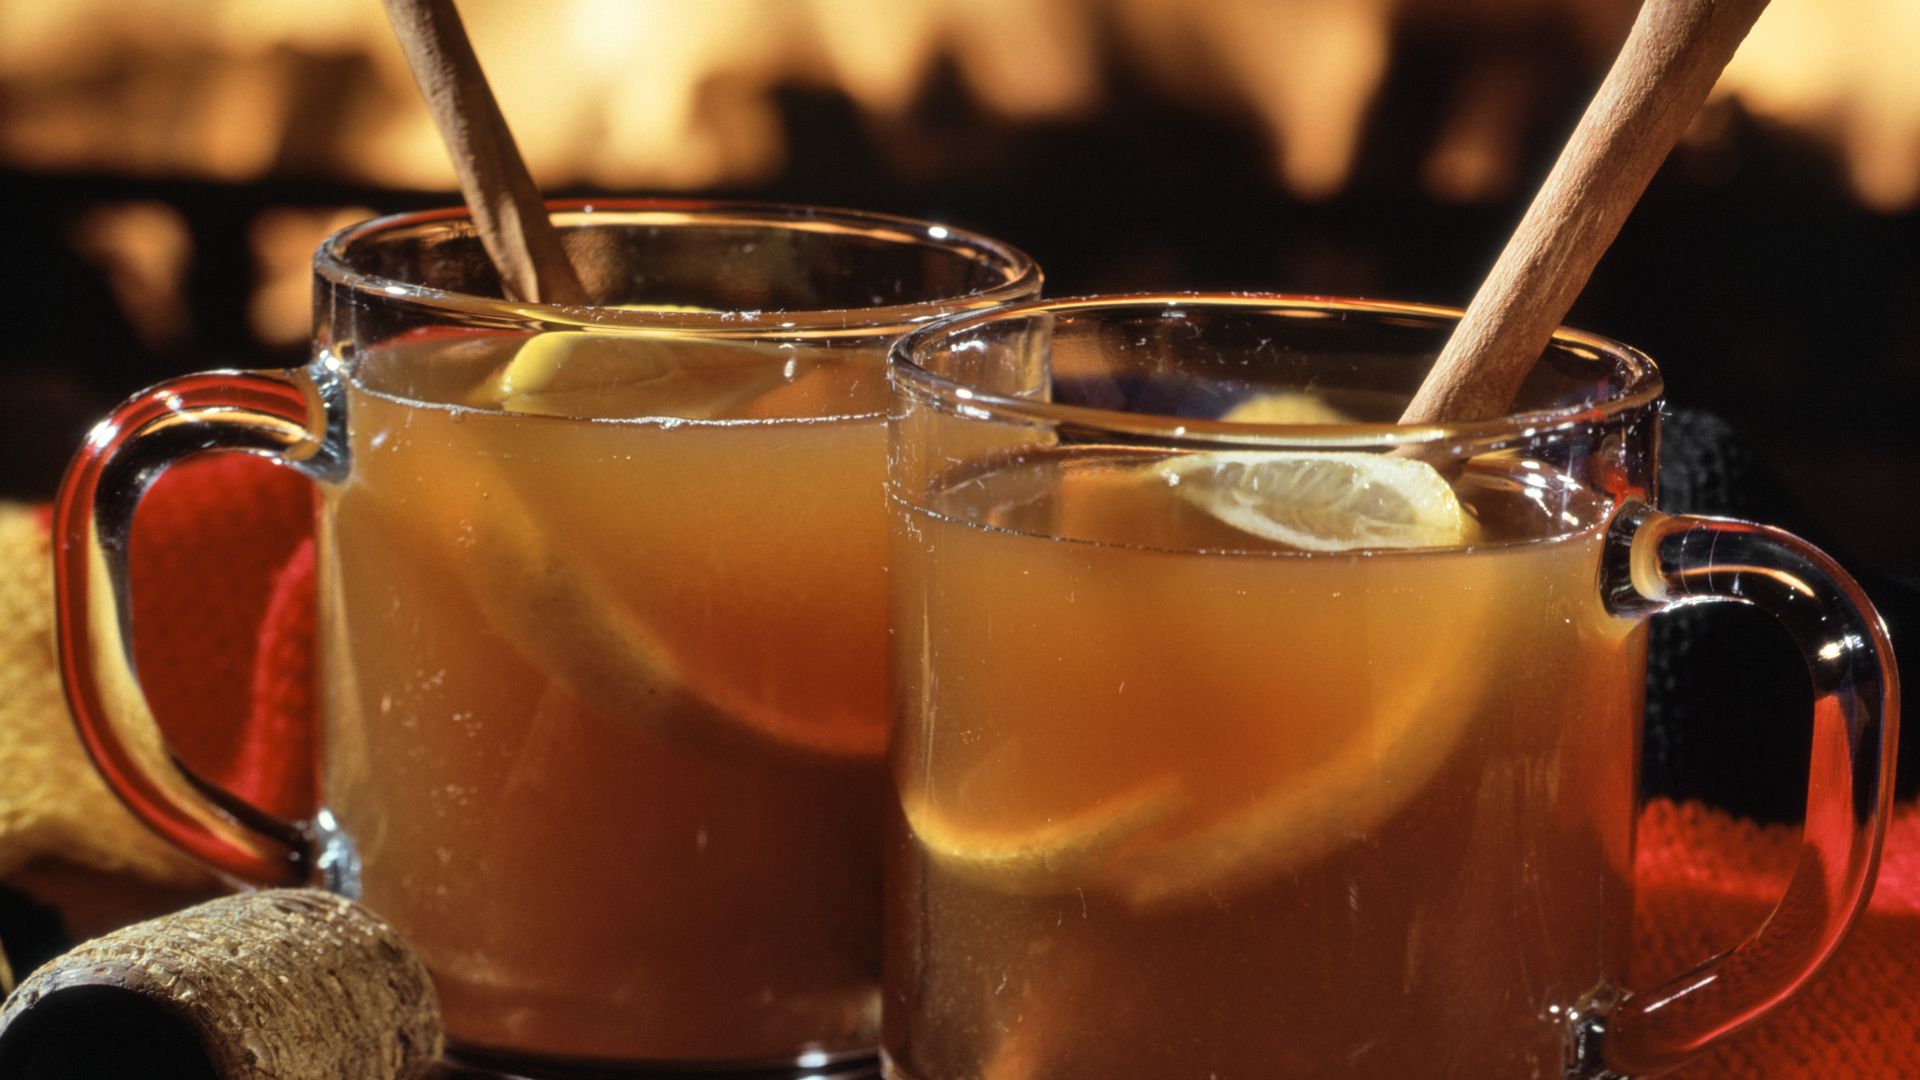 Two glass cups hot apple cider with cinnamon sticks and a roaring fireplace in the background.